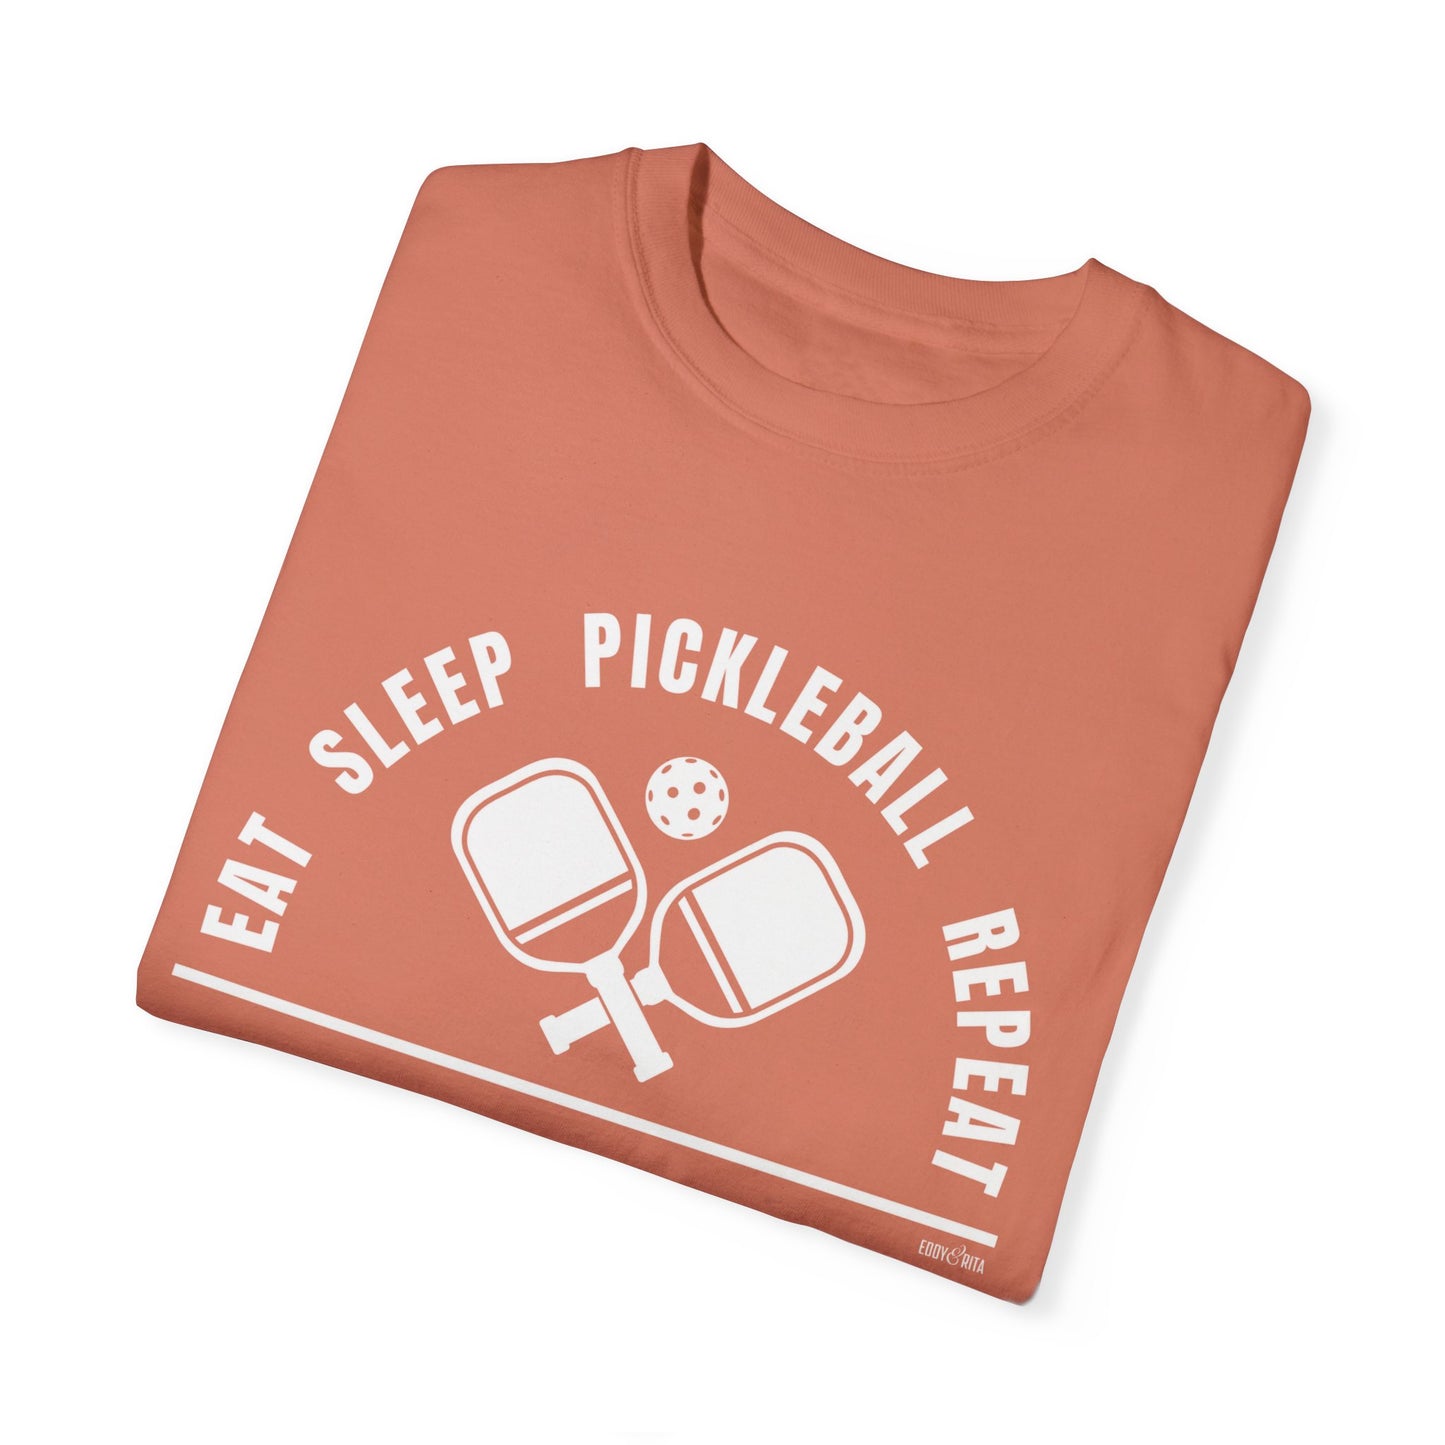 Eddy and Rita Women's Comfort Colors T-Shirt - "Eat Sleep Pickleball Repeat" Colorful Graphic Tee for Pickleball Enthusiasts